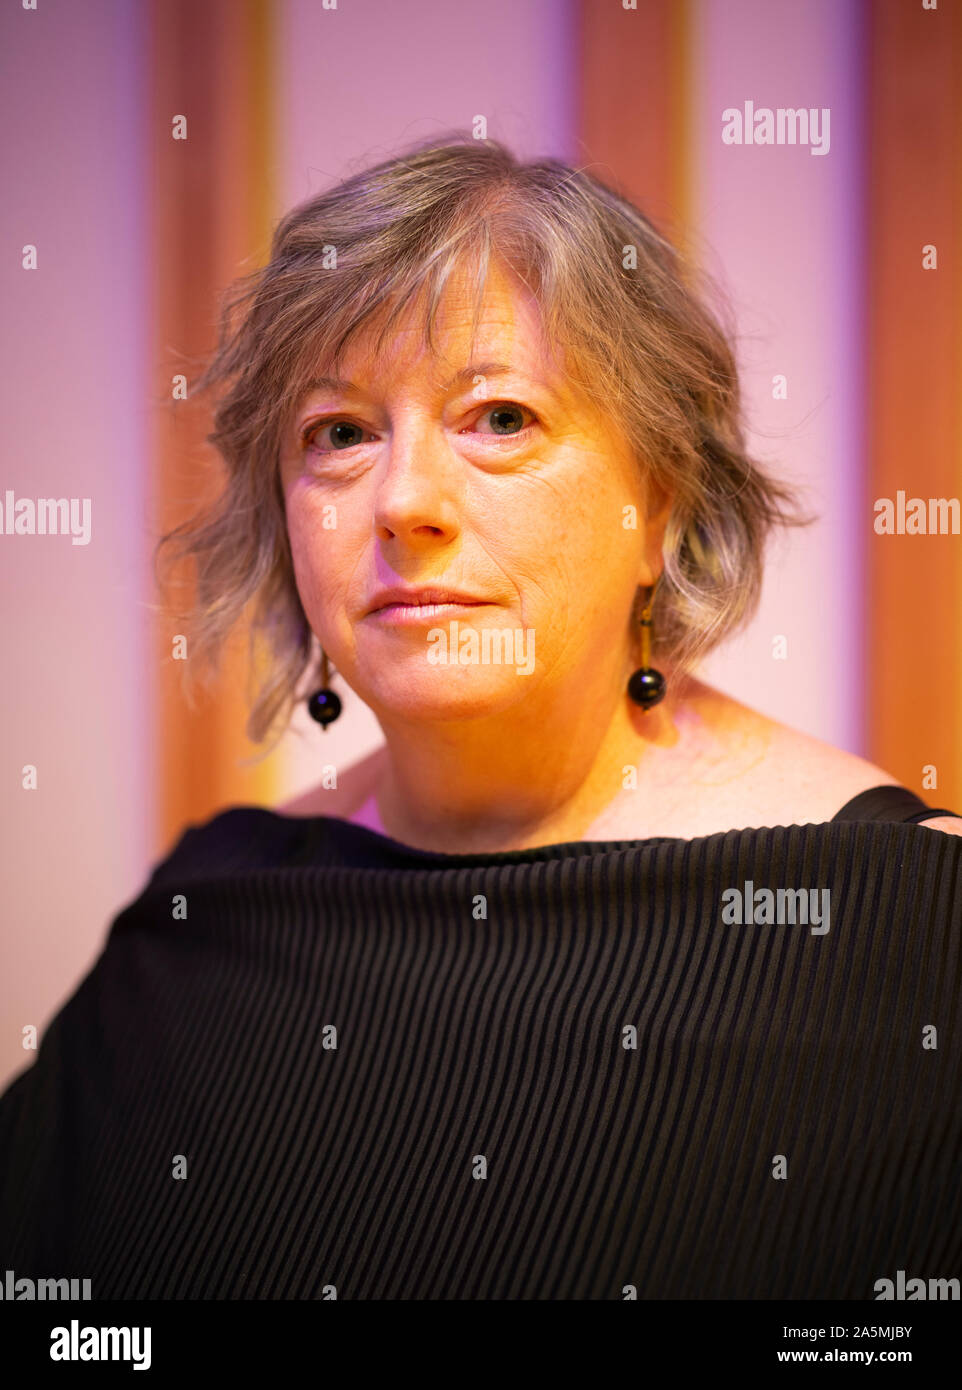 Manchester, UK. 21st October 2019. Irish poet Vona Groarke appears at Manchester Literature Festival. © Russell Hart/Alamy Live News. Stock Photo